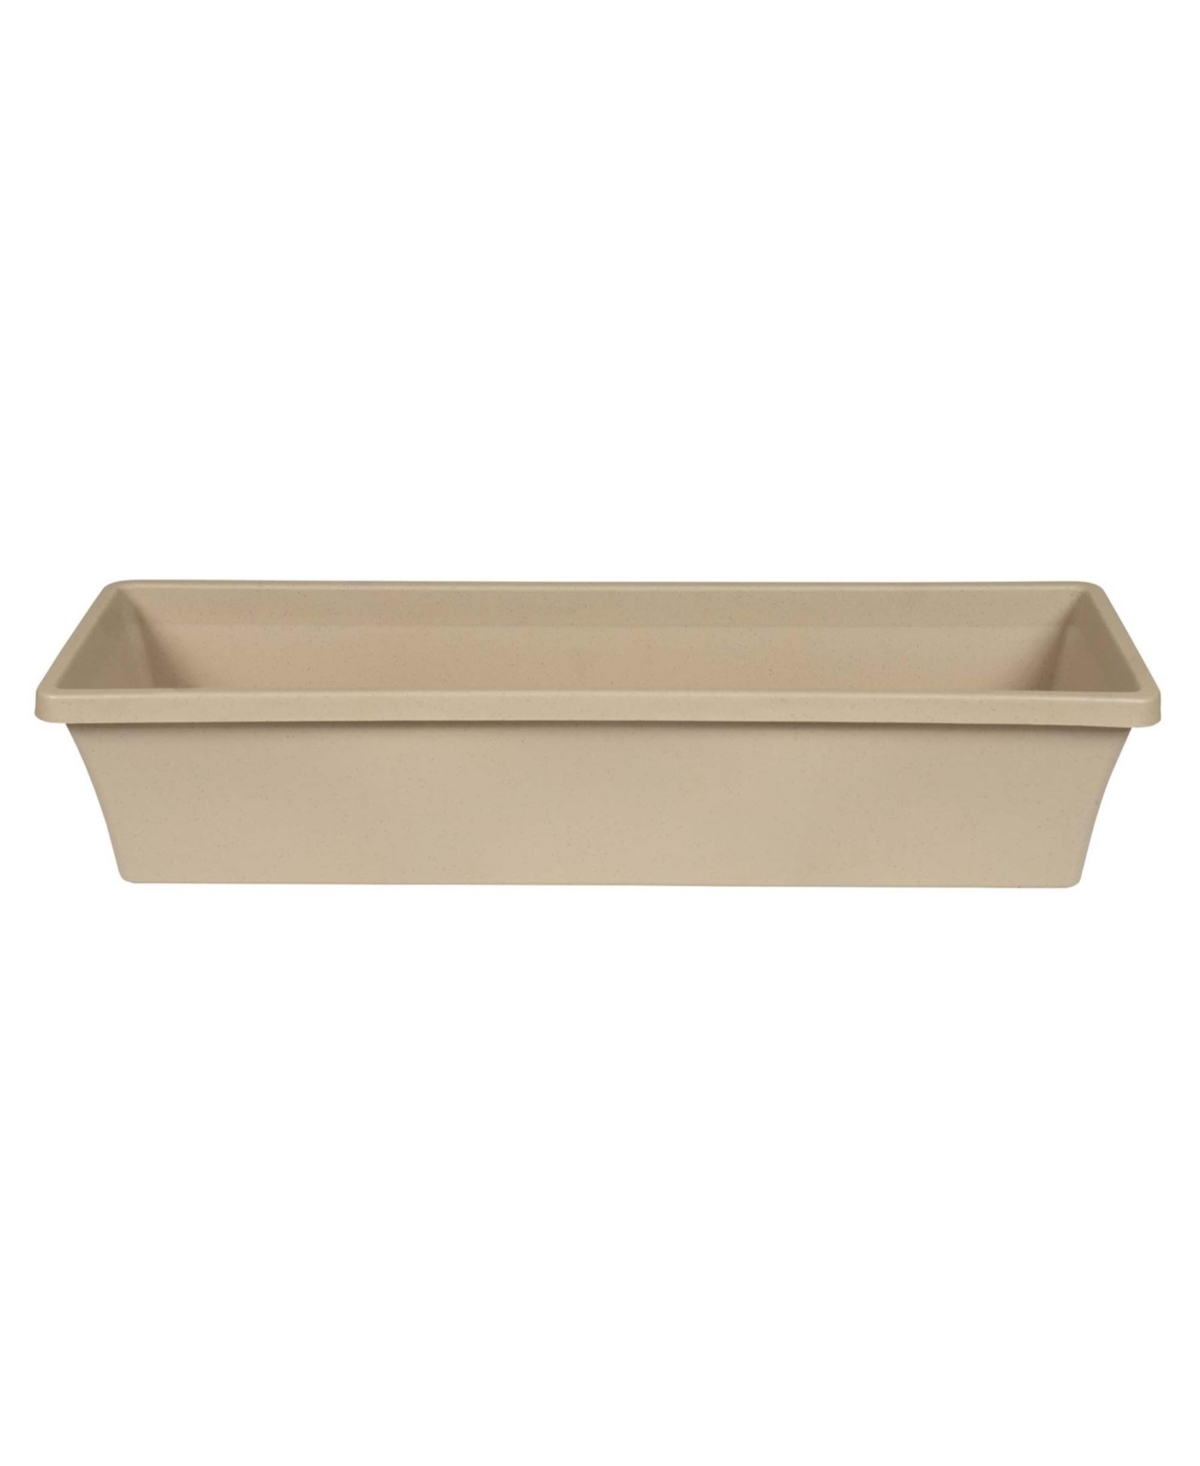 Living TRB3035 Window Box Planter, Taupe - 30 inches - Taupe